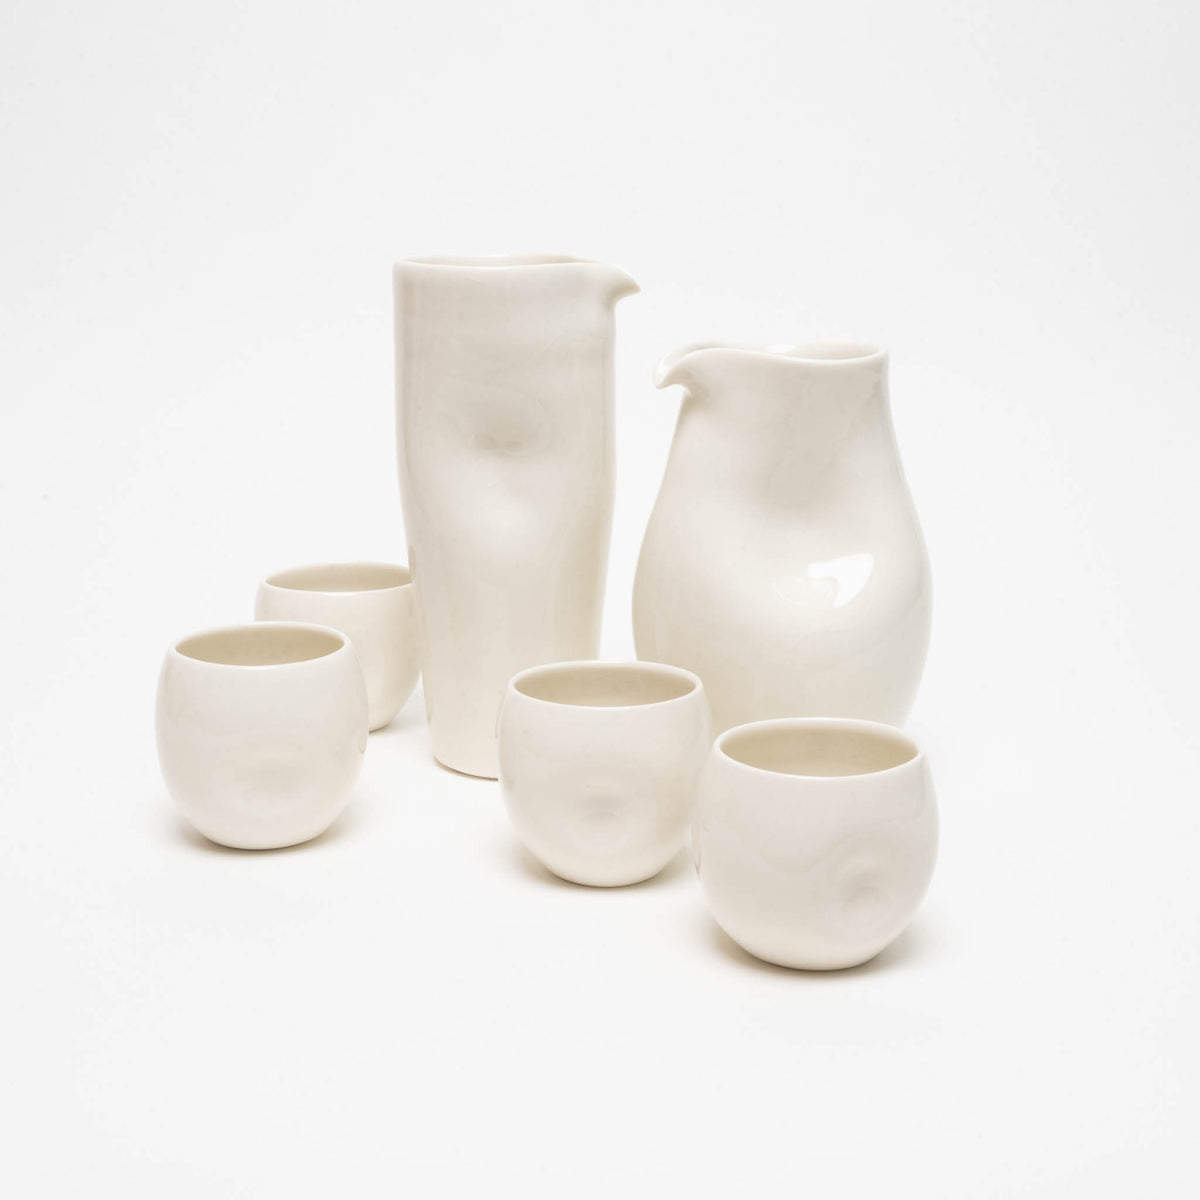 Natural porcelain mug with recessed grip small